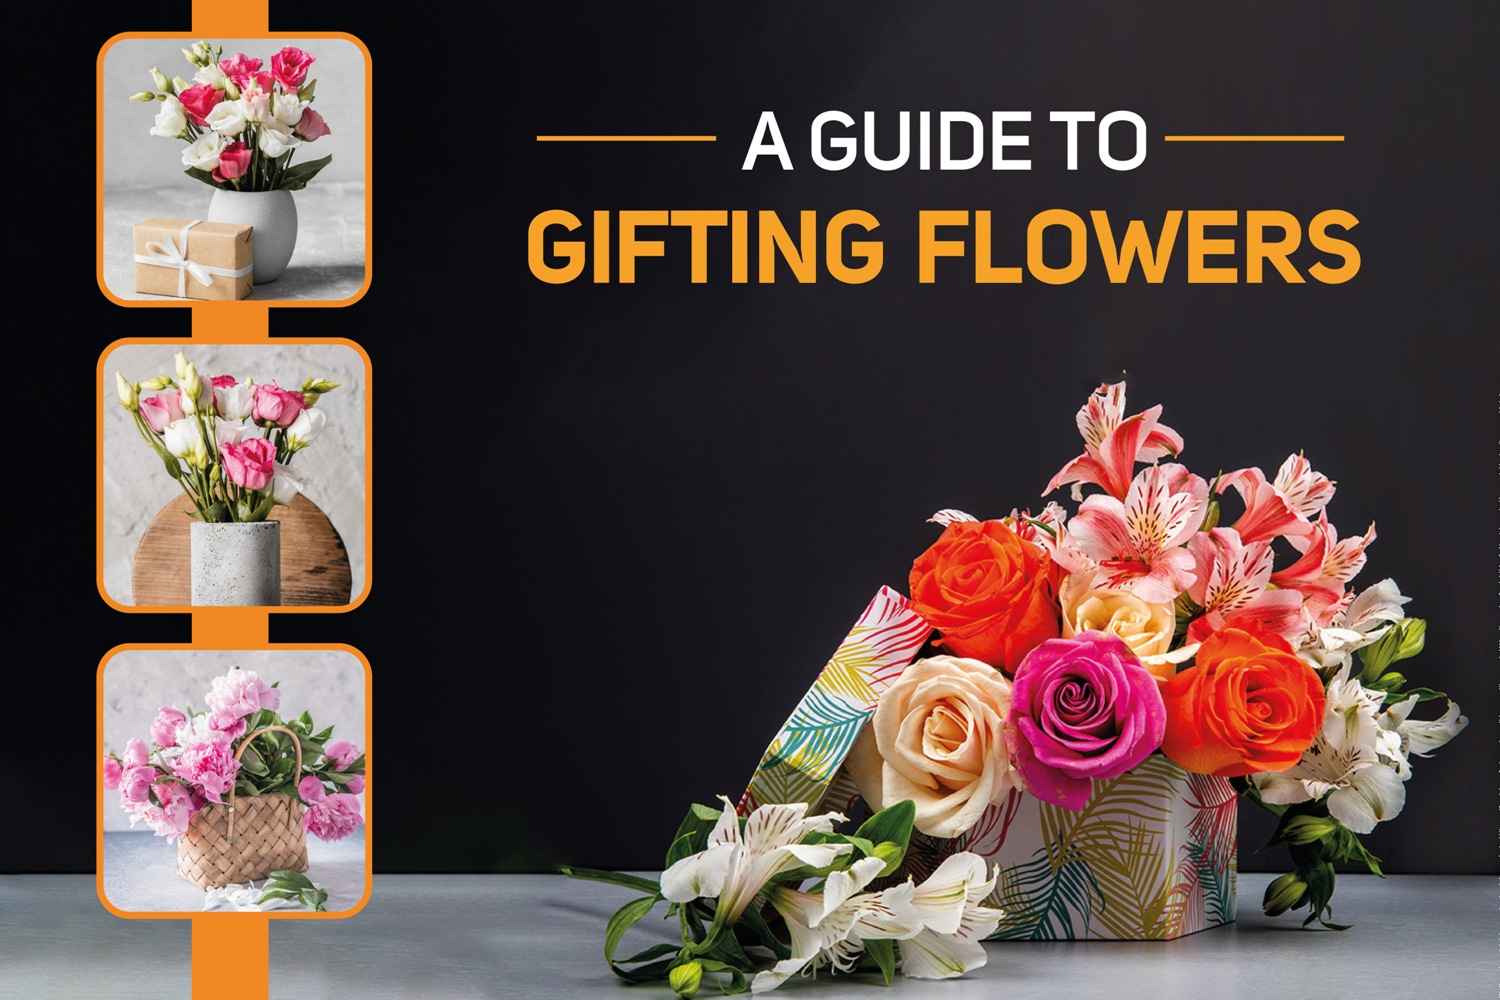 A Guide to Gifting Flowers